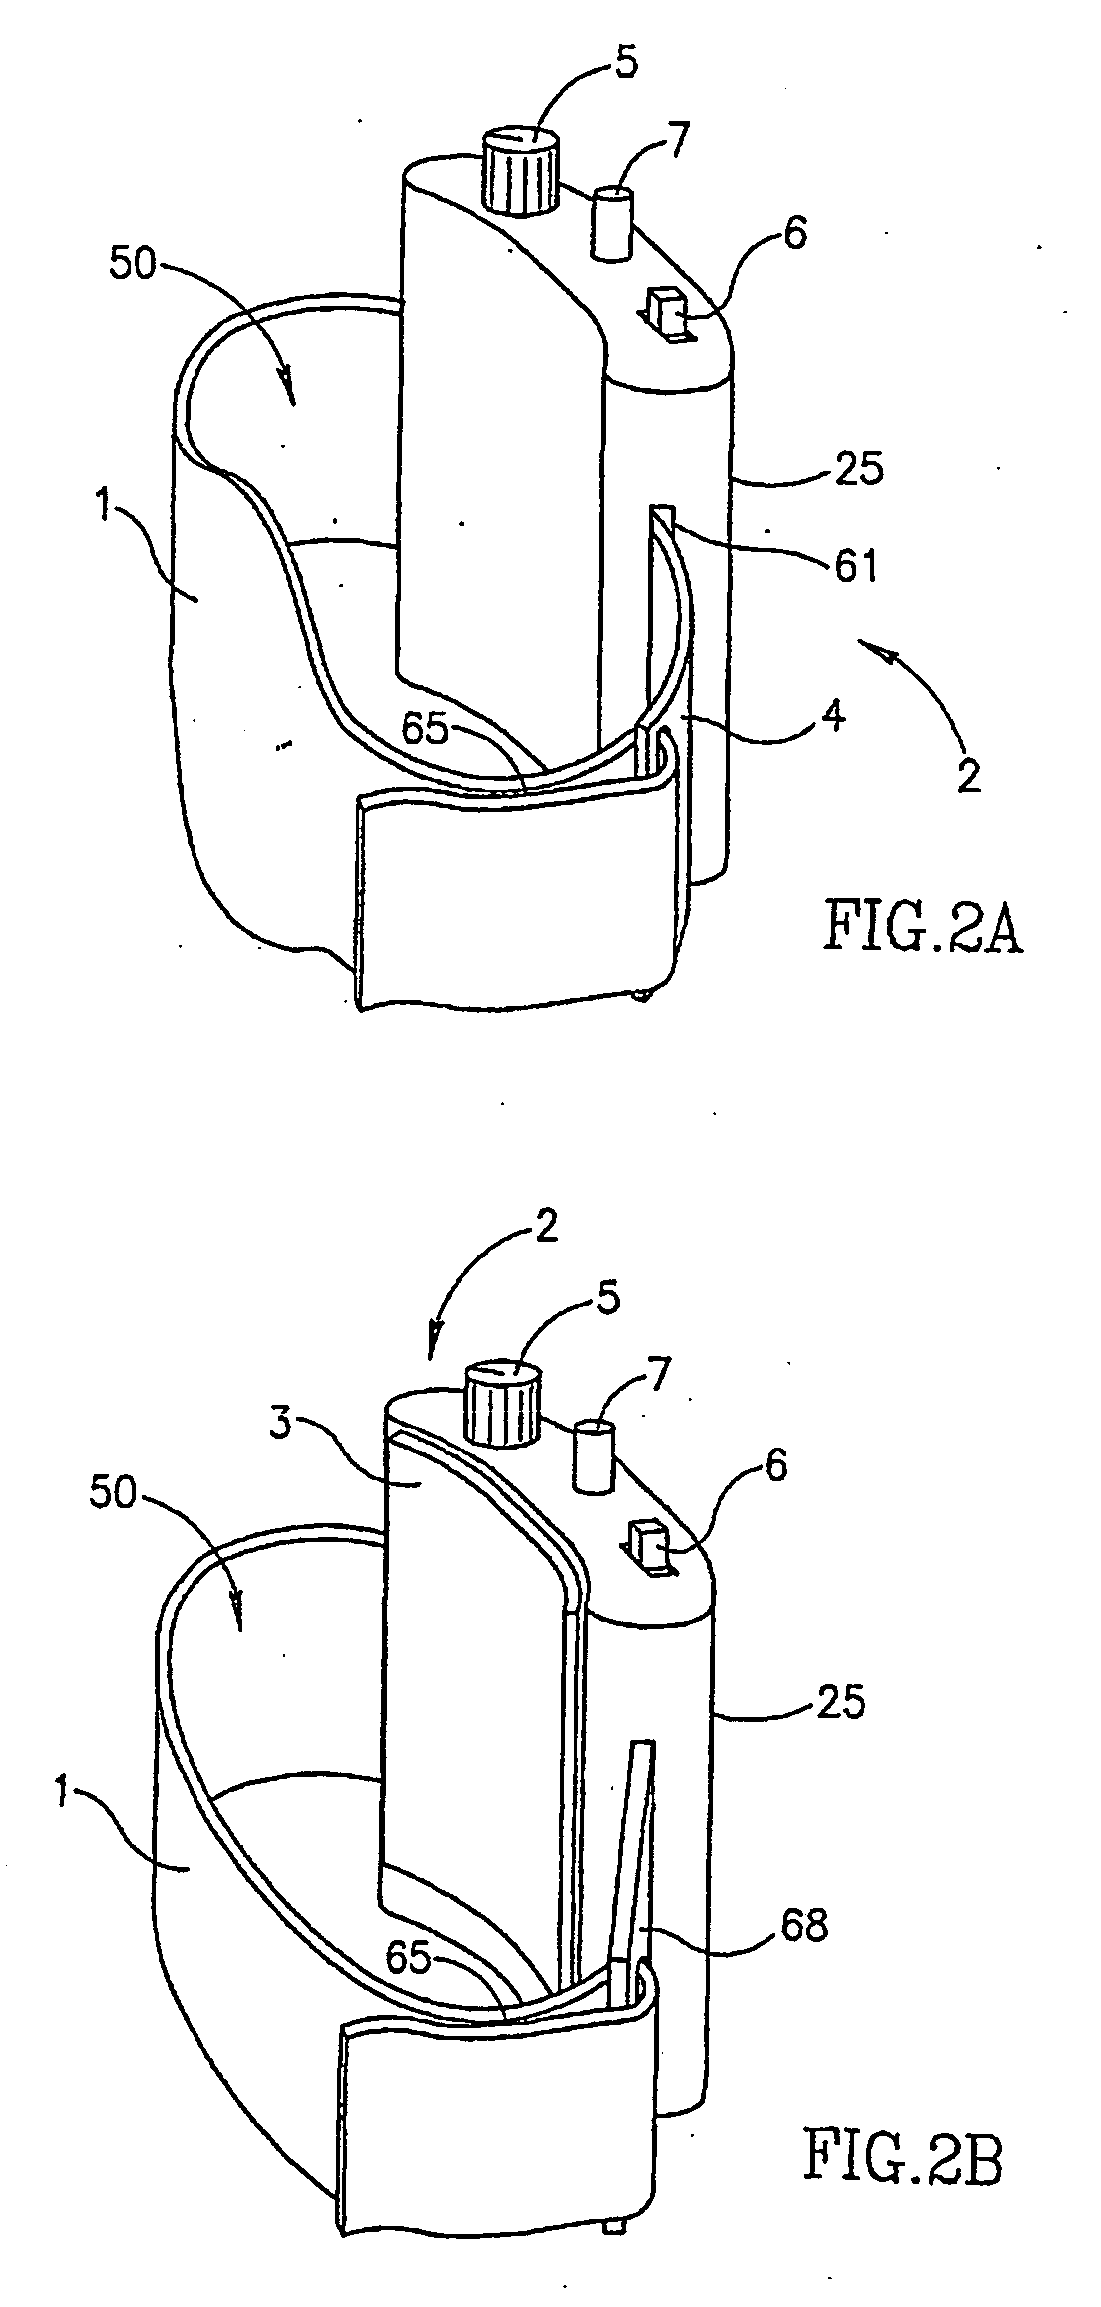 Portable device for the enhancement of circulation of blood and lymph flow in a limb